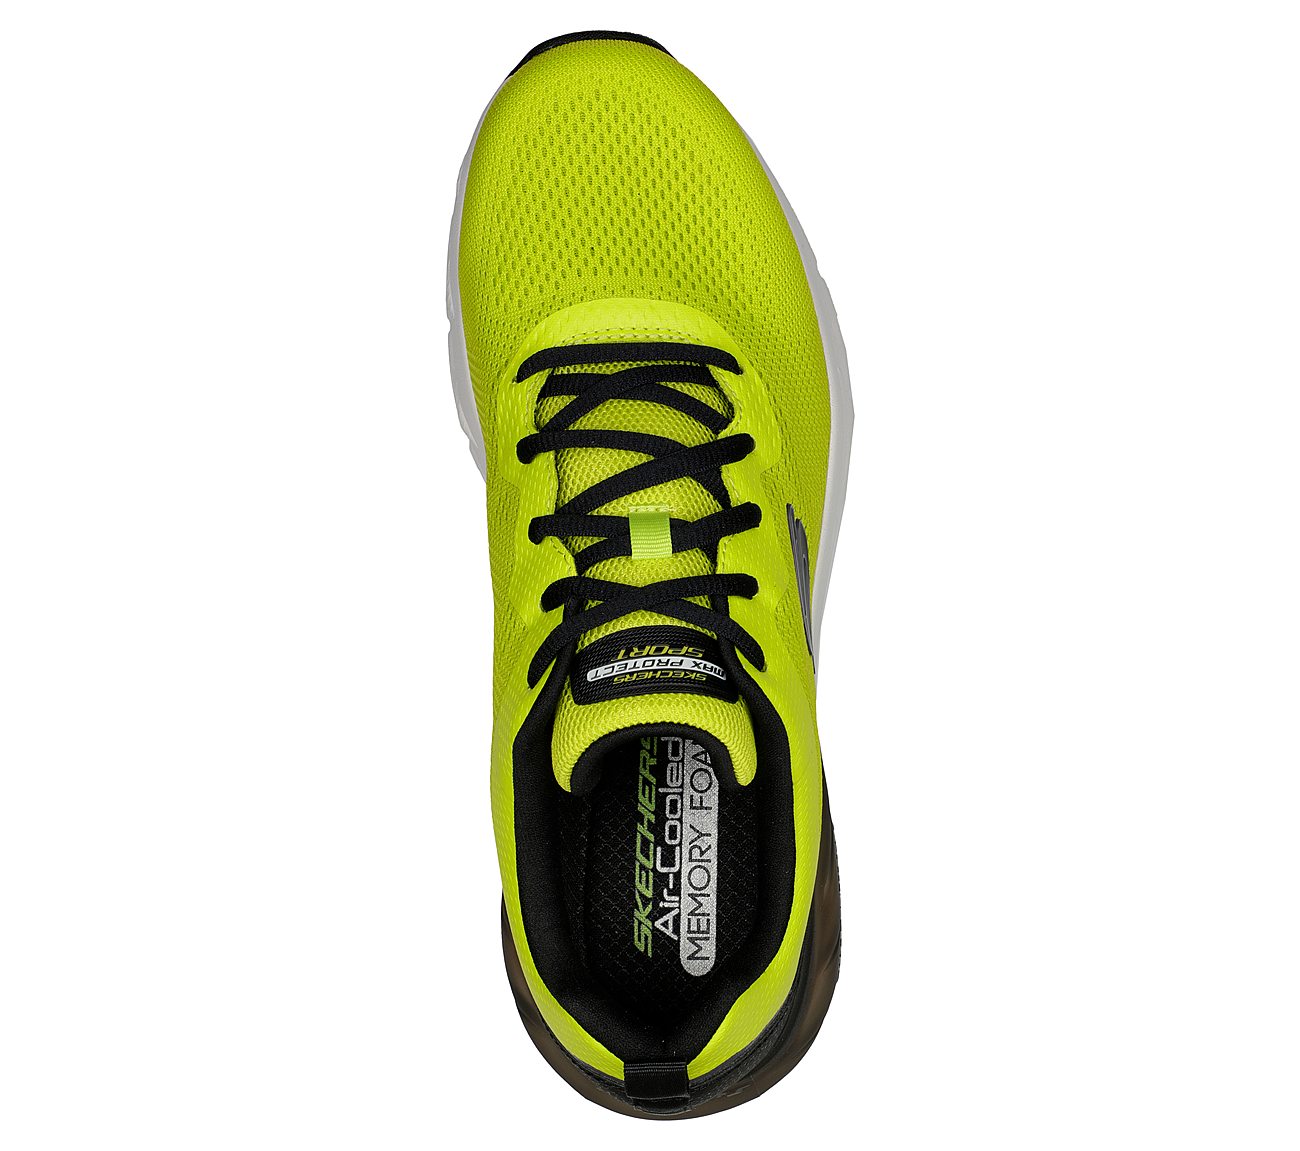 MAX PROTECT SPORT - SAFEGUARD, LIME/BLACK Footwear Top View